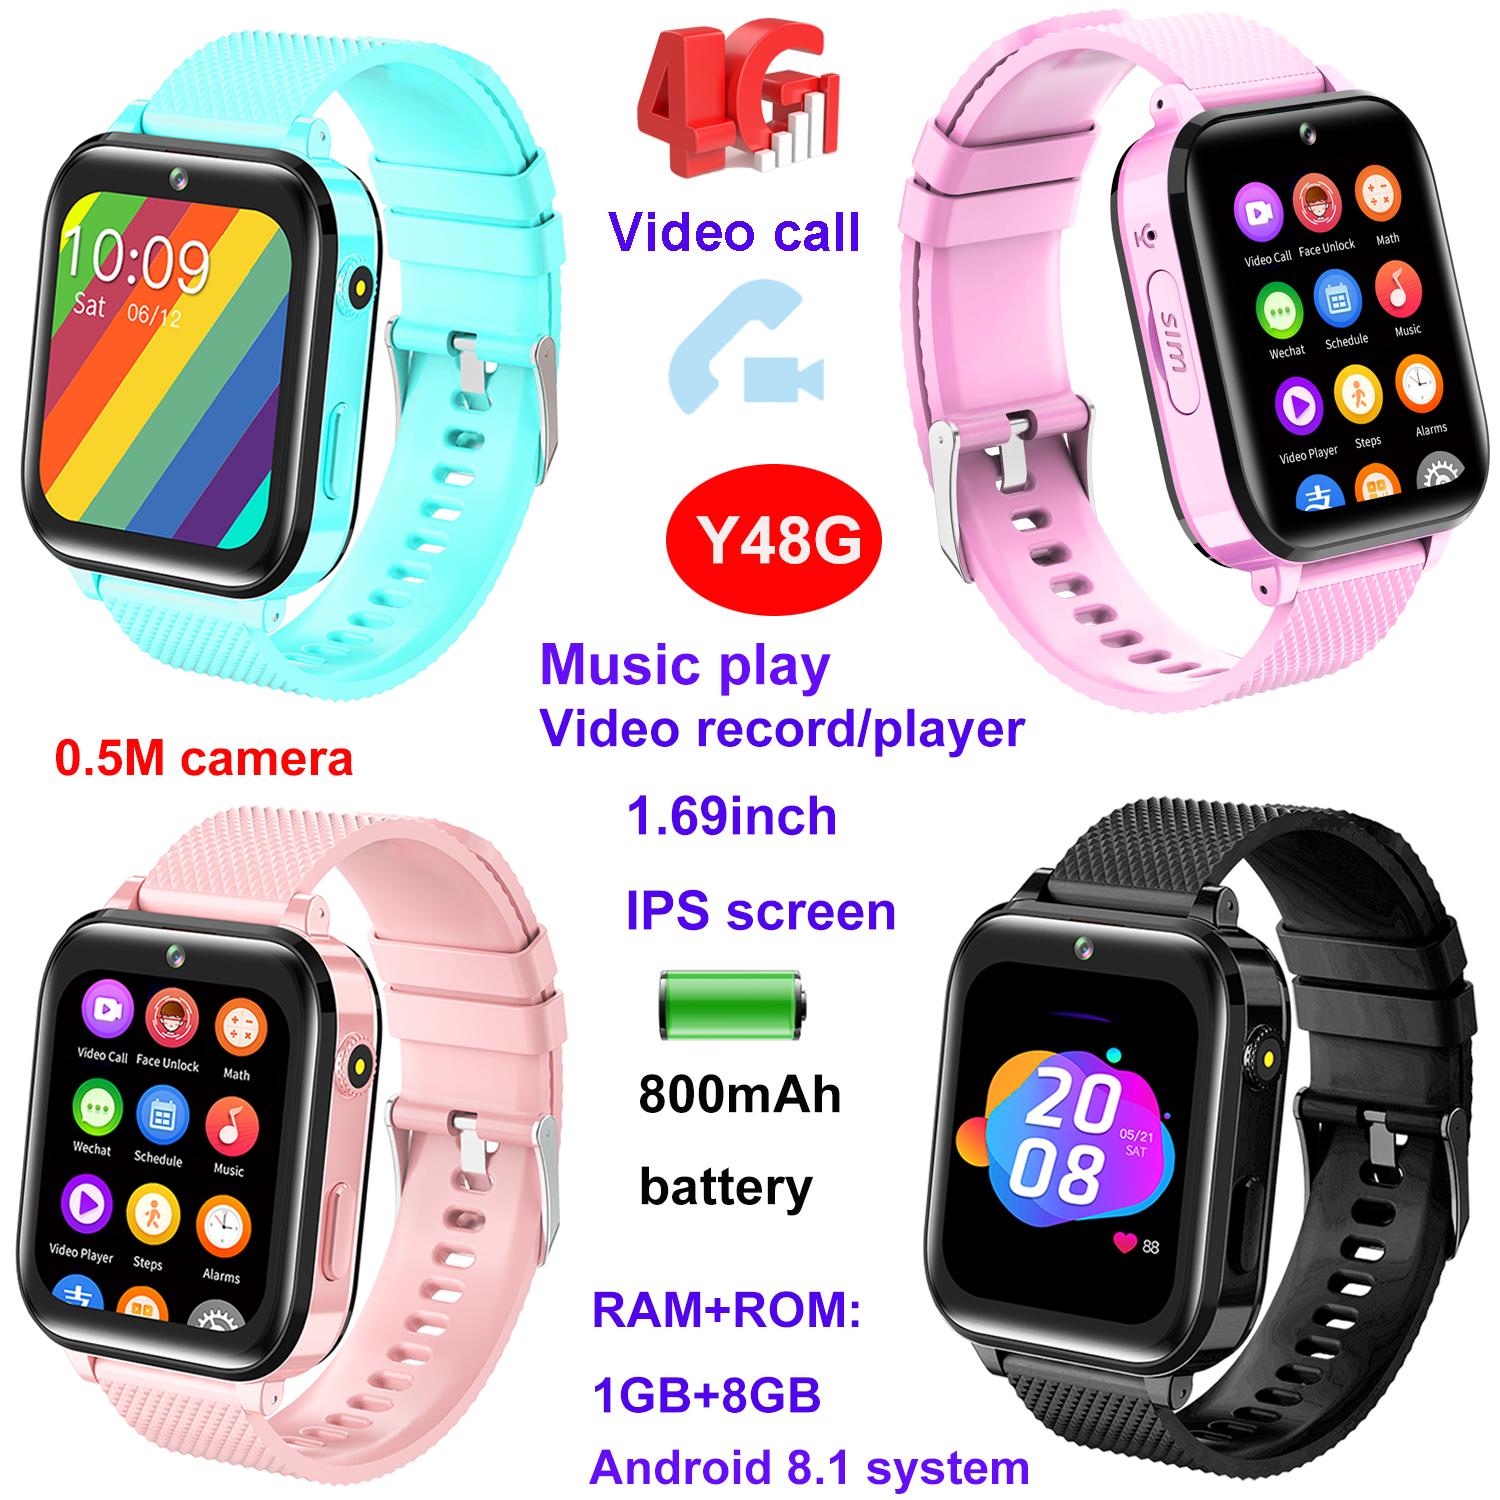 4G new Android 8.1 Waterproof GPS Tracker Watch Y48G